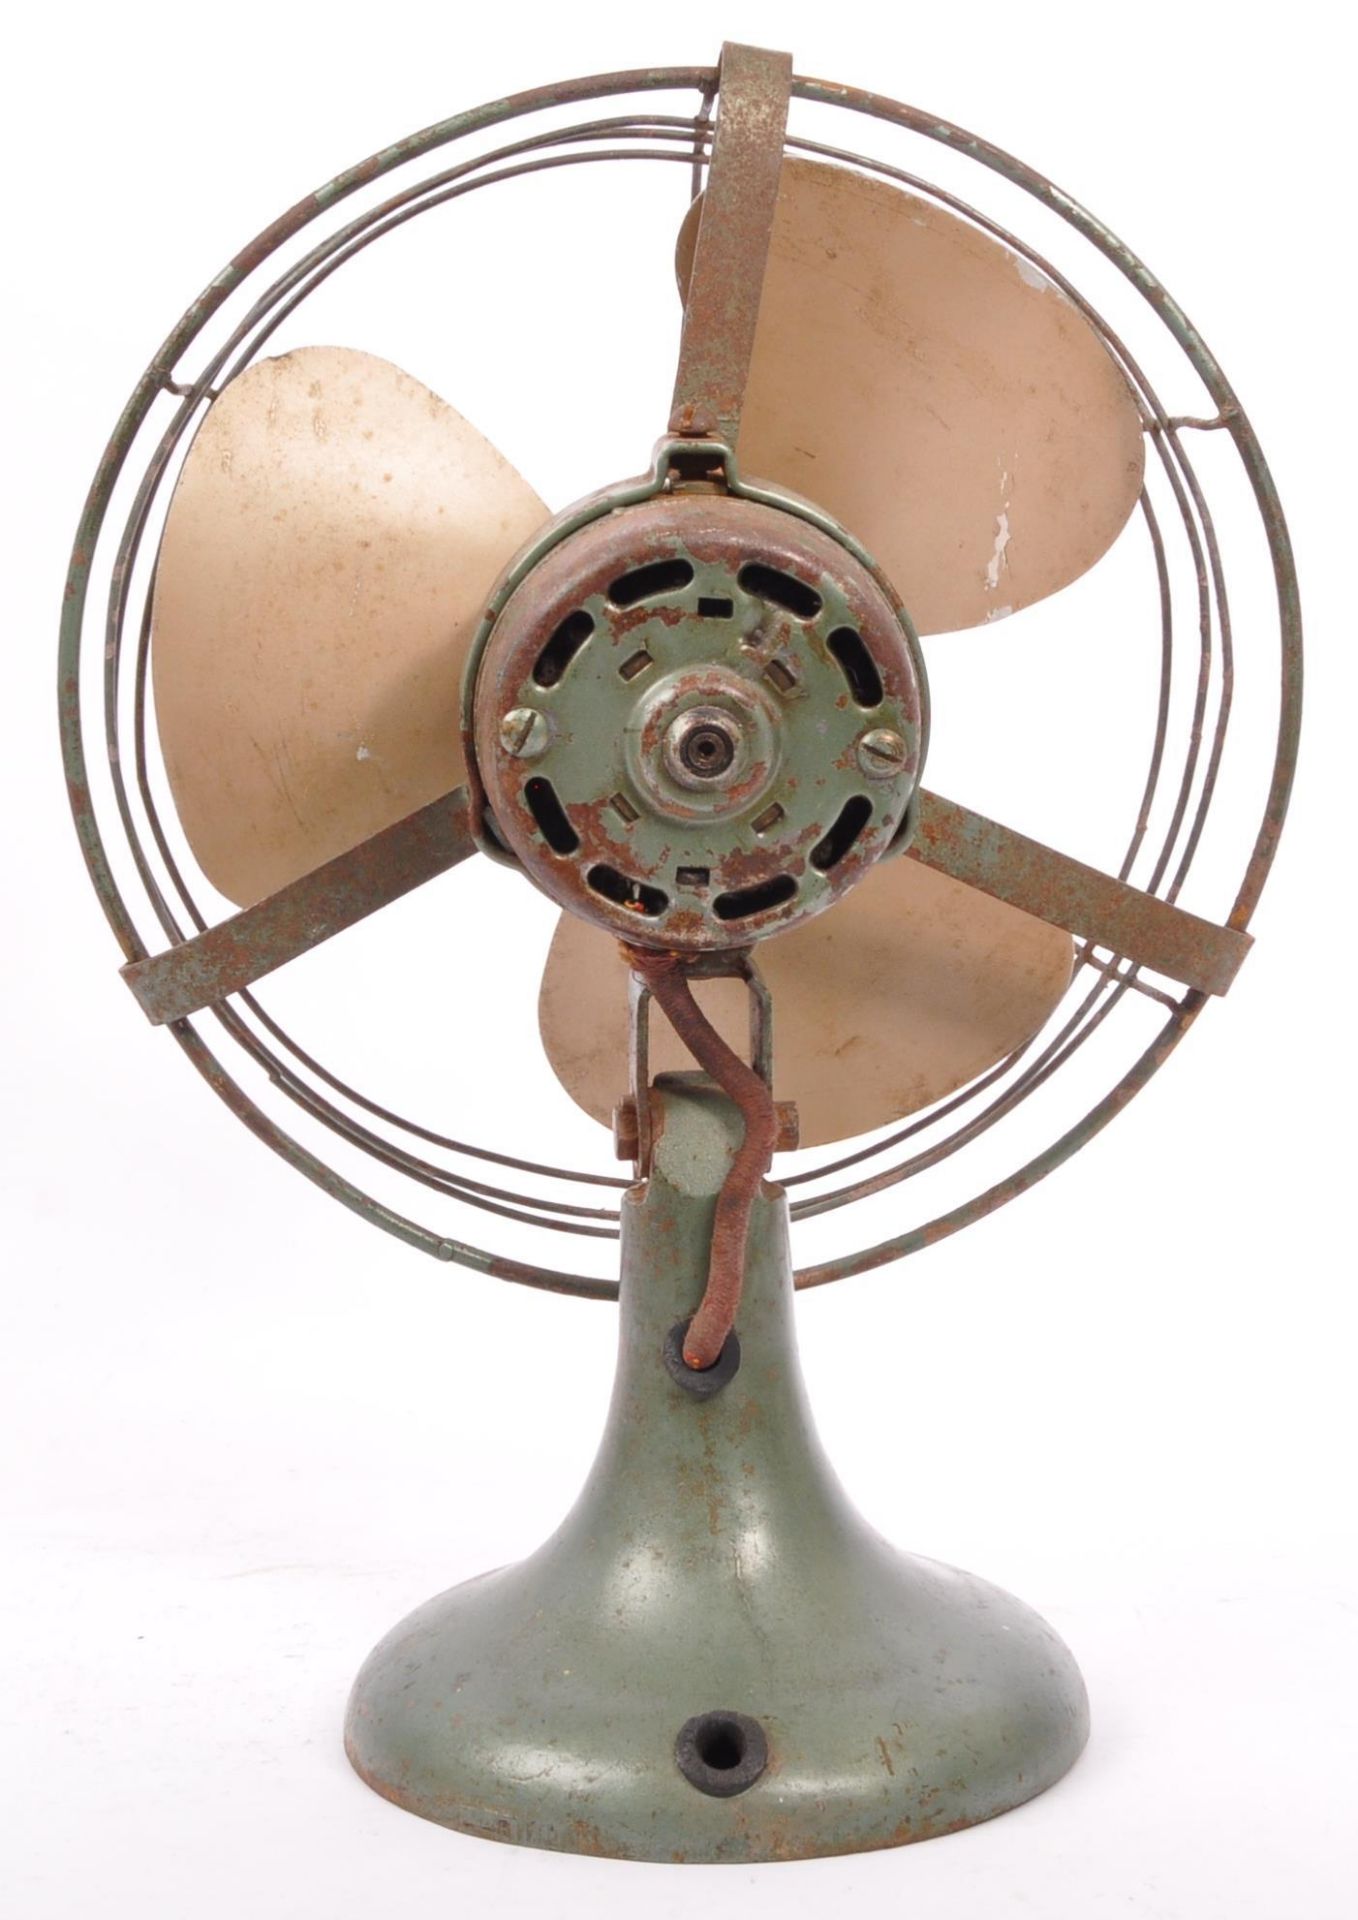 VINTAGE RETRO INDUSTRIAL ELECTRONIC DESK FAN BY H FROST - Image 3 of 5